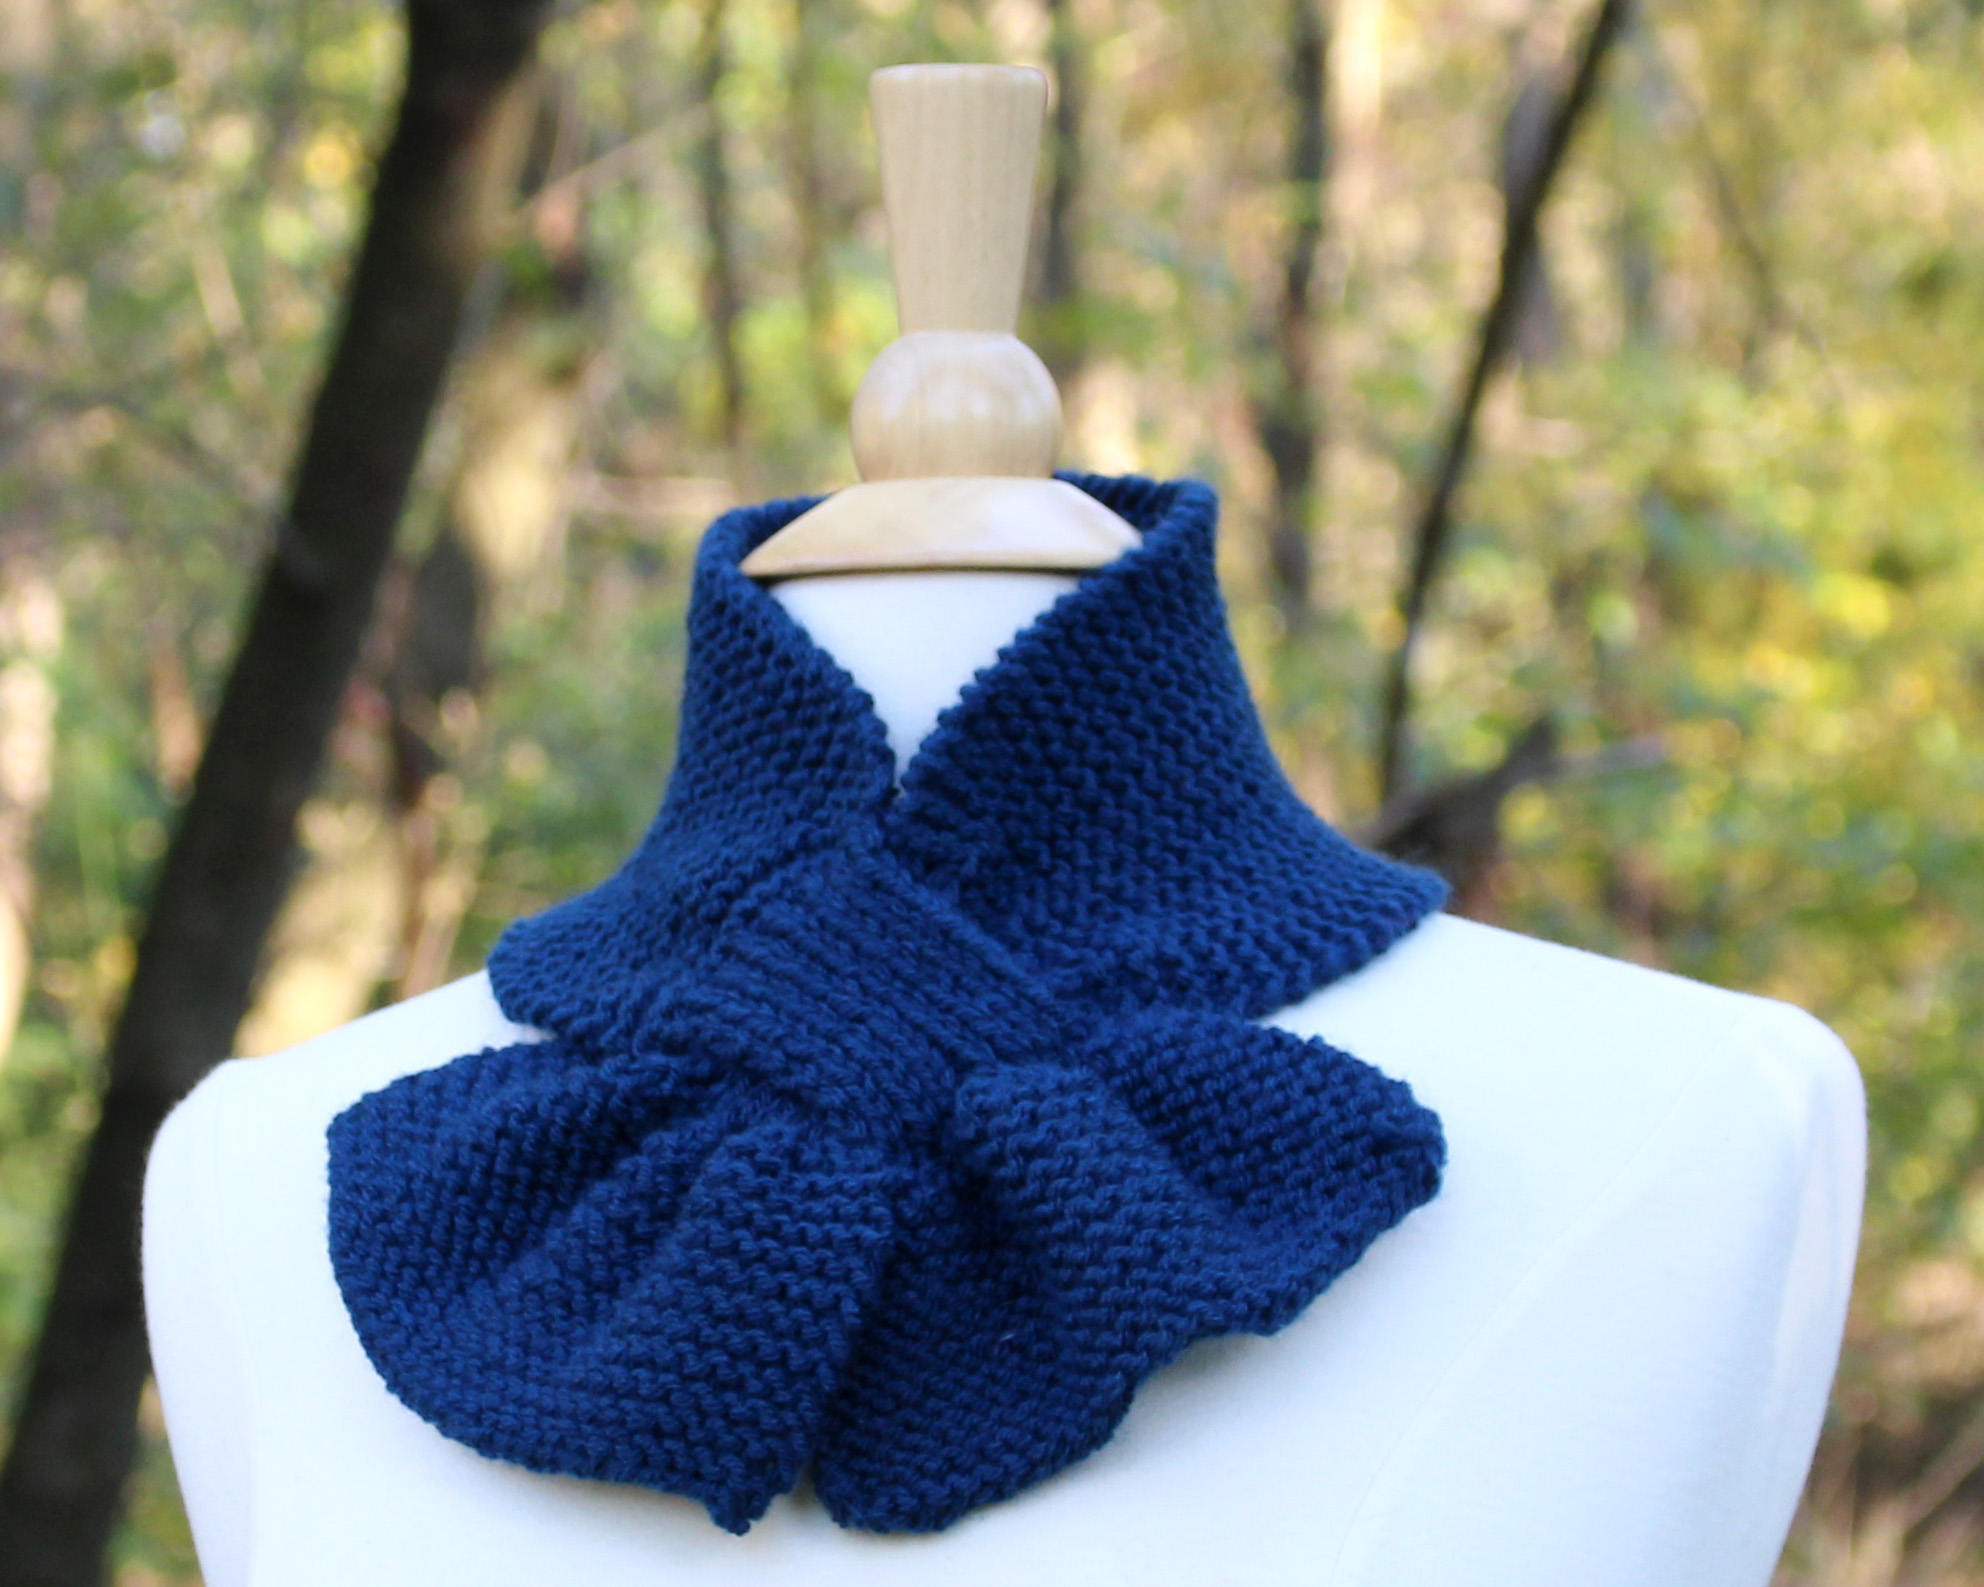 Ascot Scarf Knitting Pattern Midnight Blue Scarf Dark Blue Knit Scarf Knit Ascot Scarf Unique Scarf Pull Through Scarf Small Scarf Keyhole Scarf Gift For Her